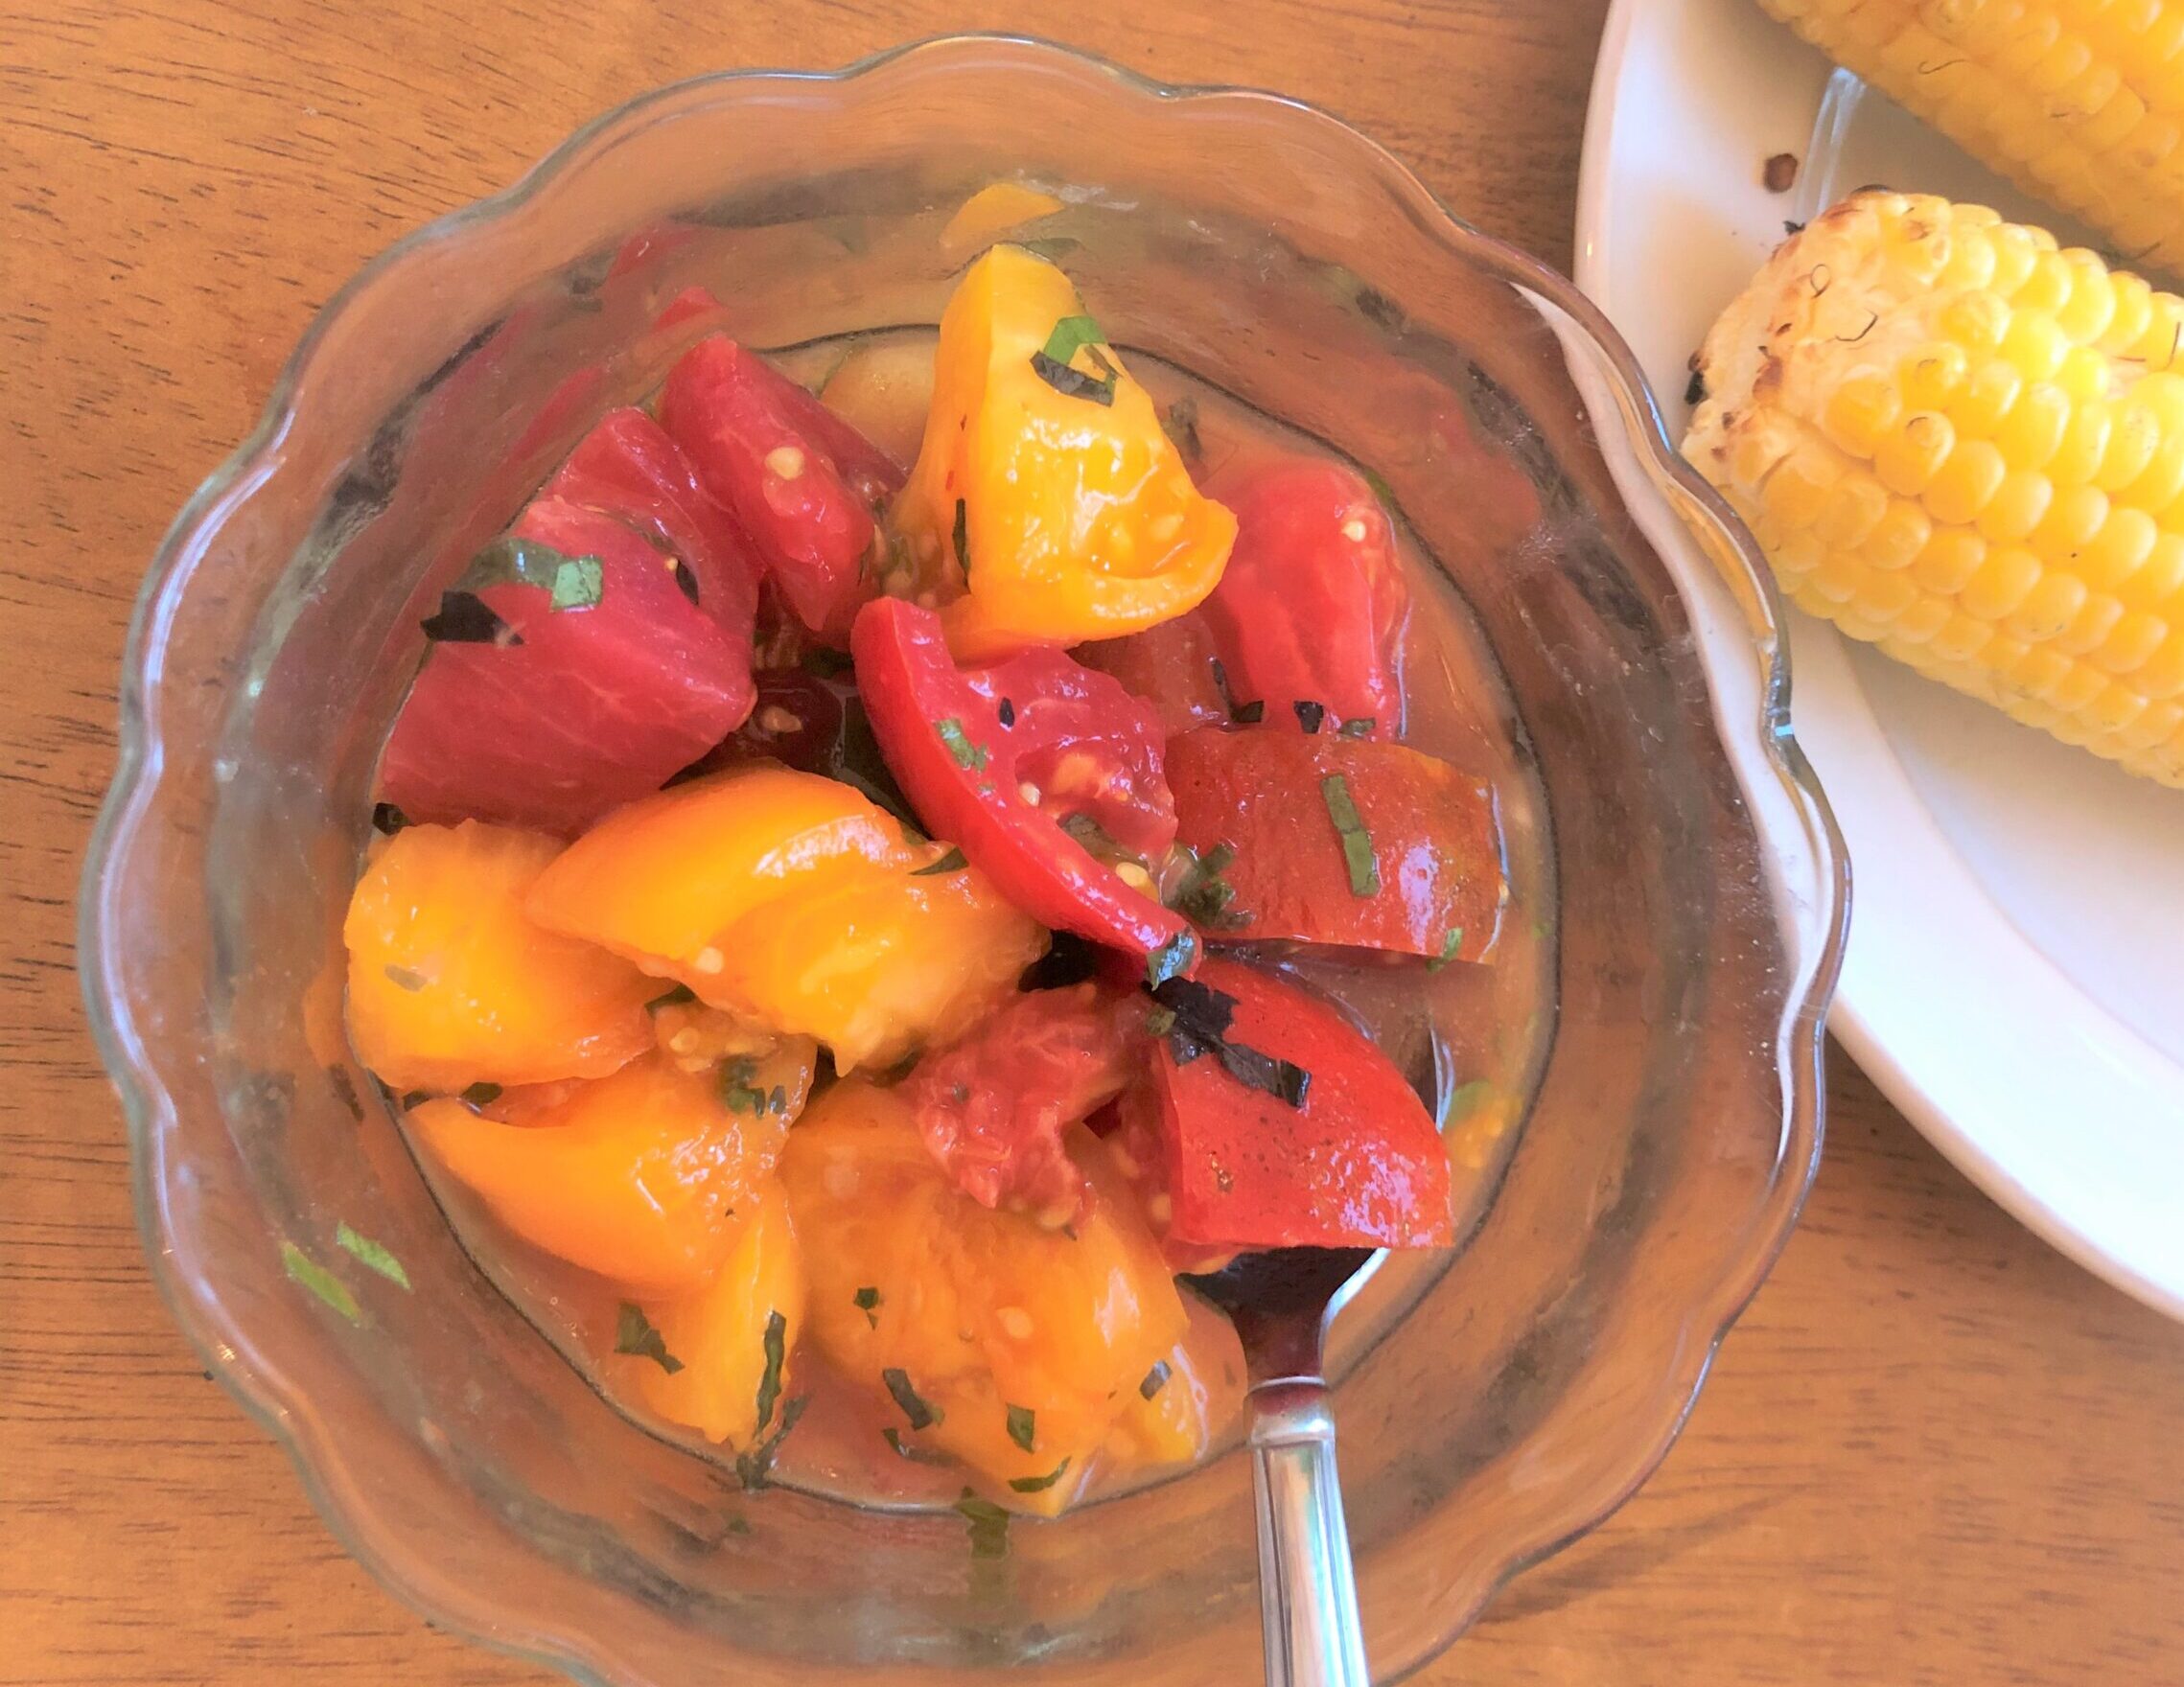 Summer Tomato Salad today, with memories of yesterday.